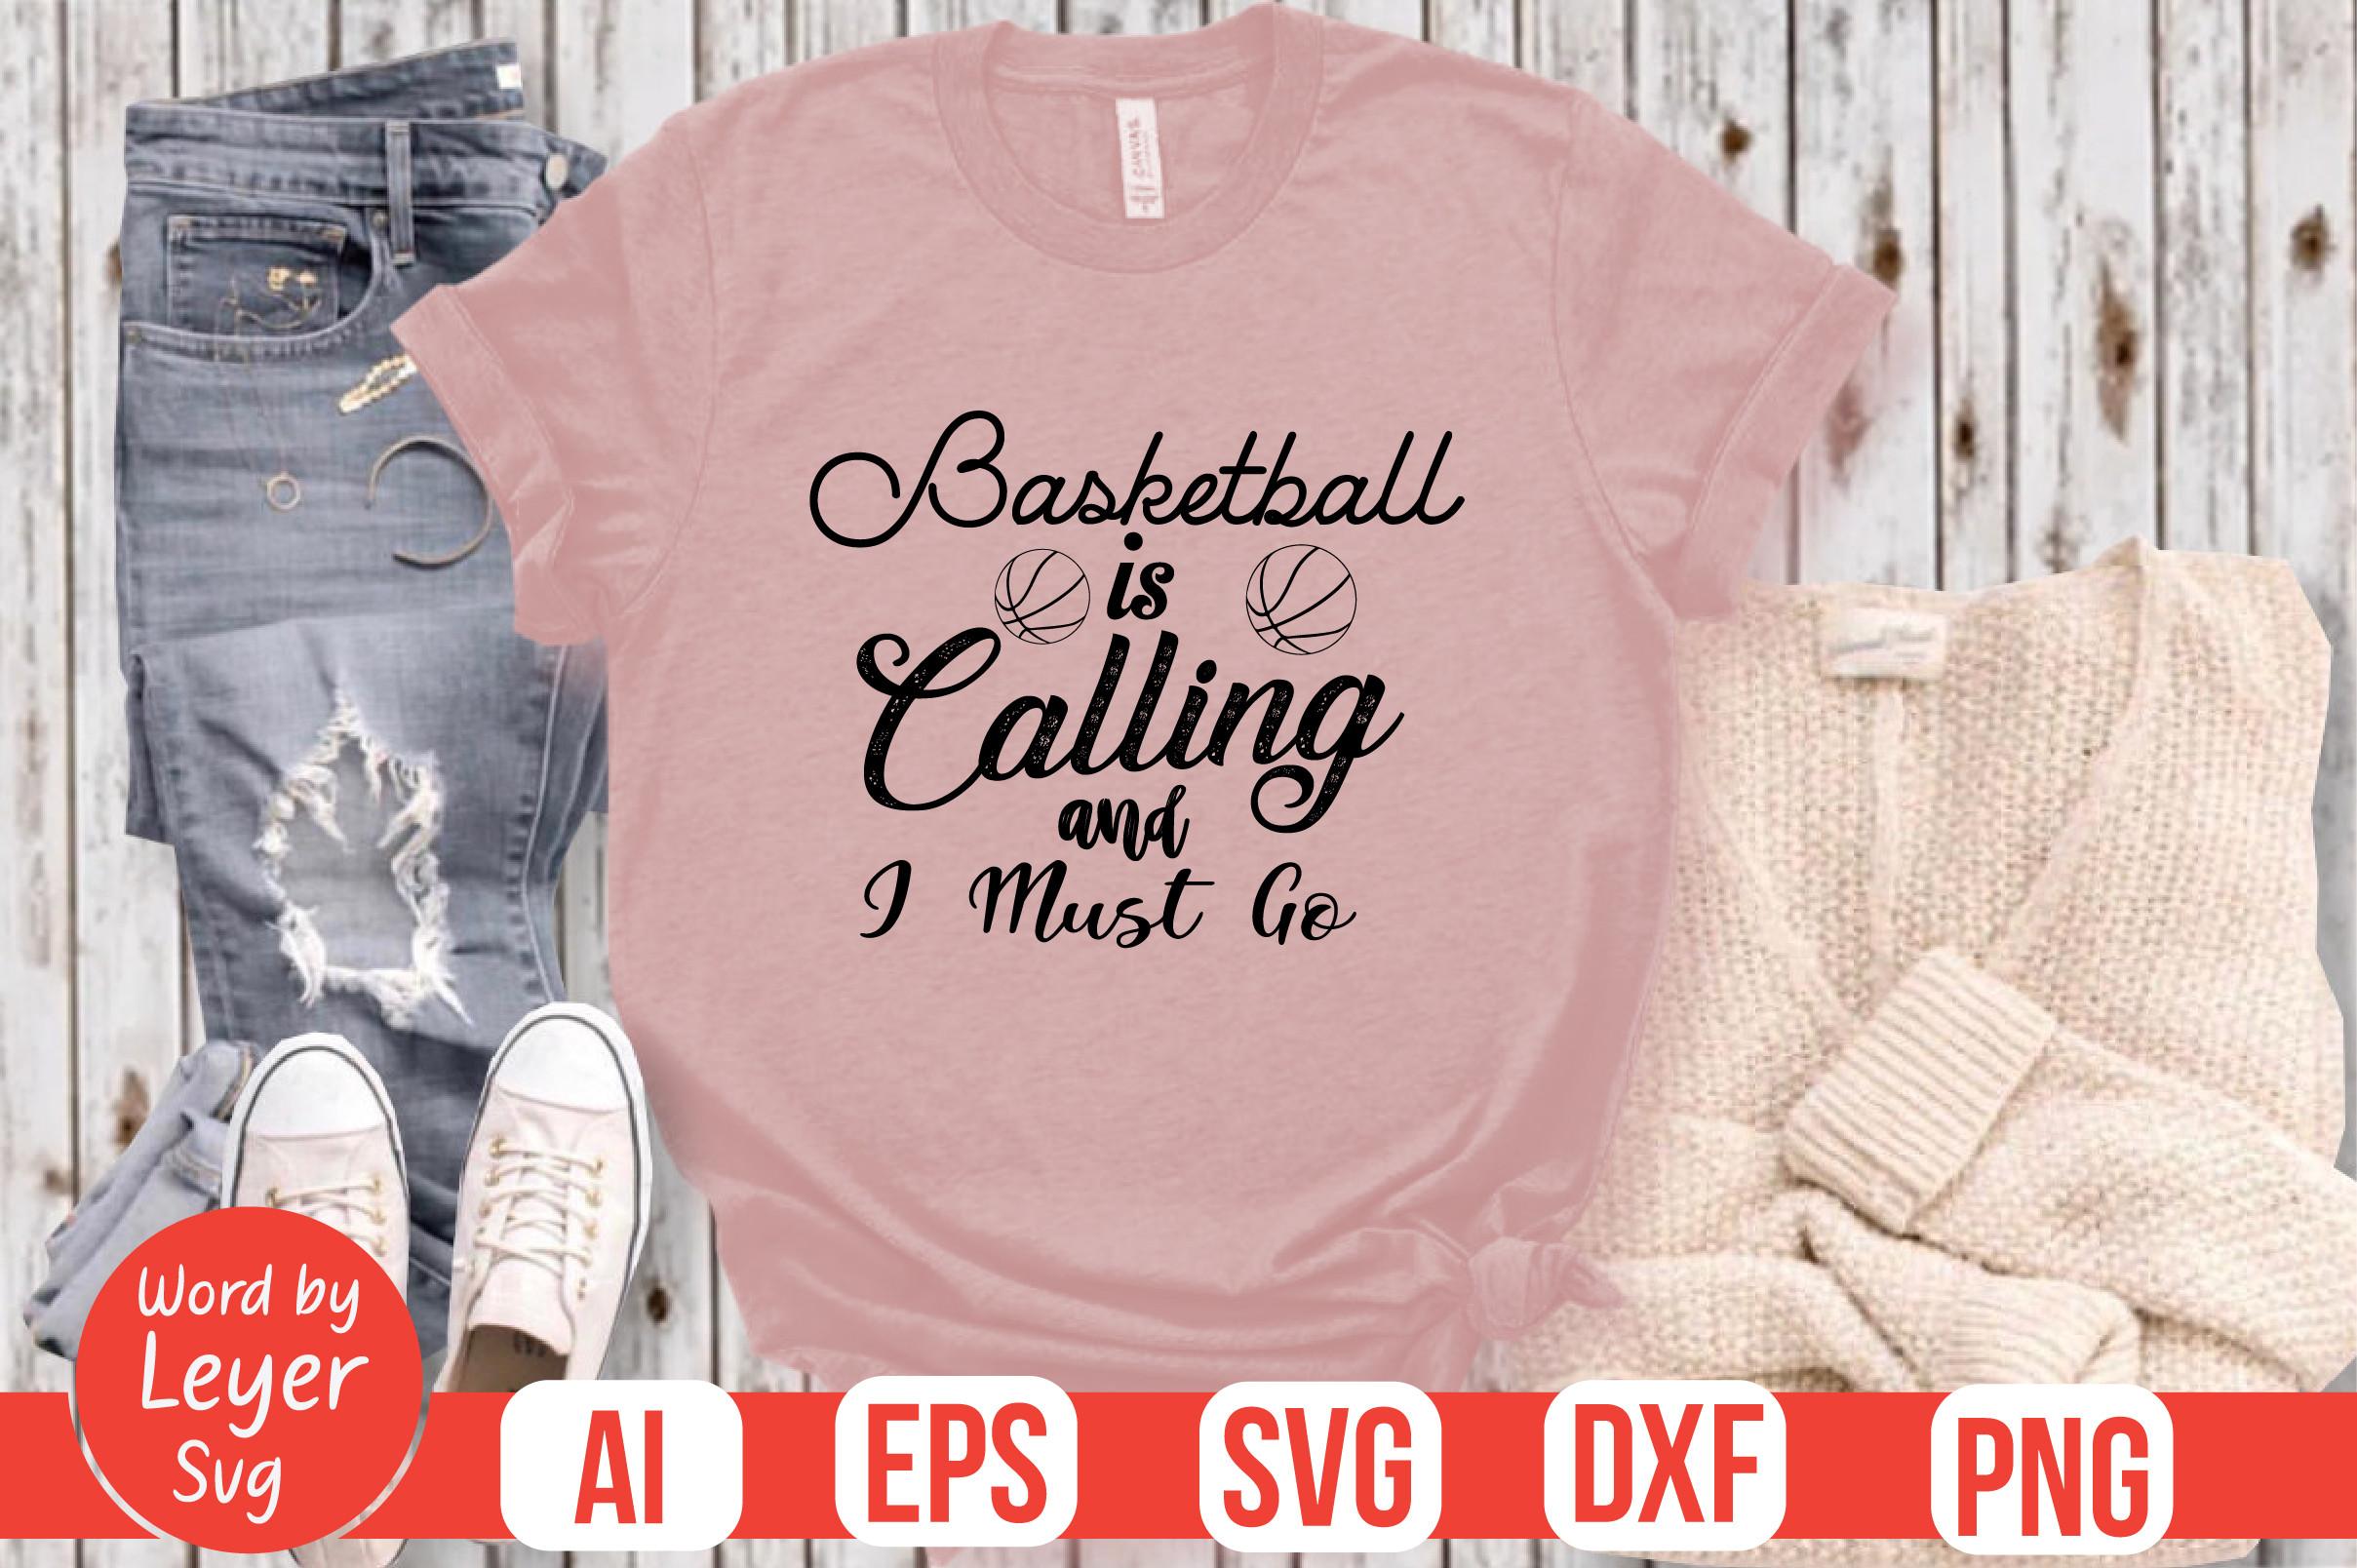 BASKETBALL is CALLING and I MUST GO